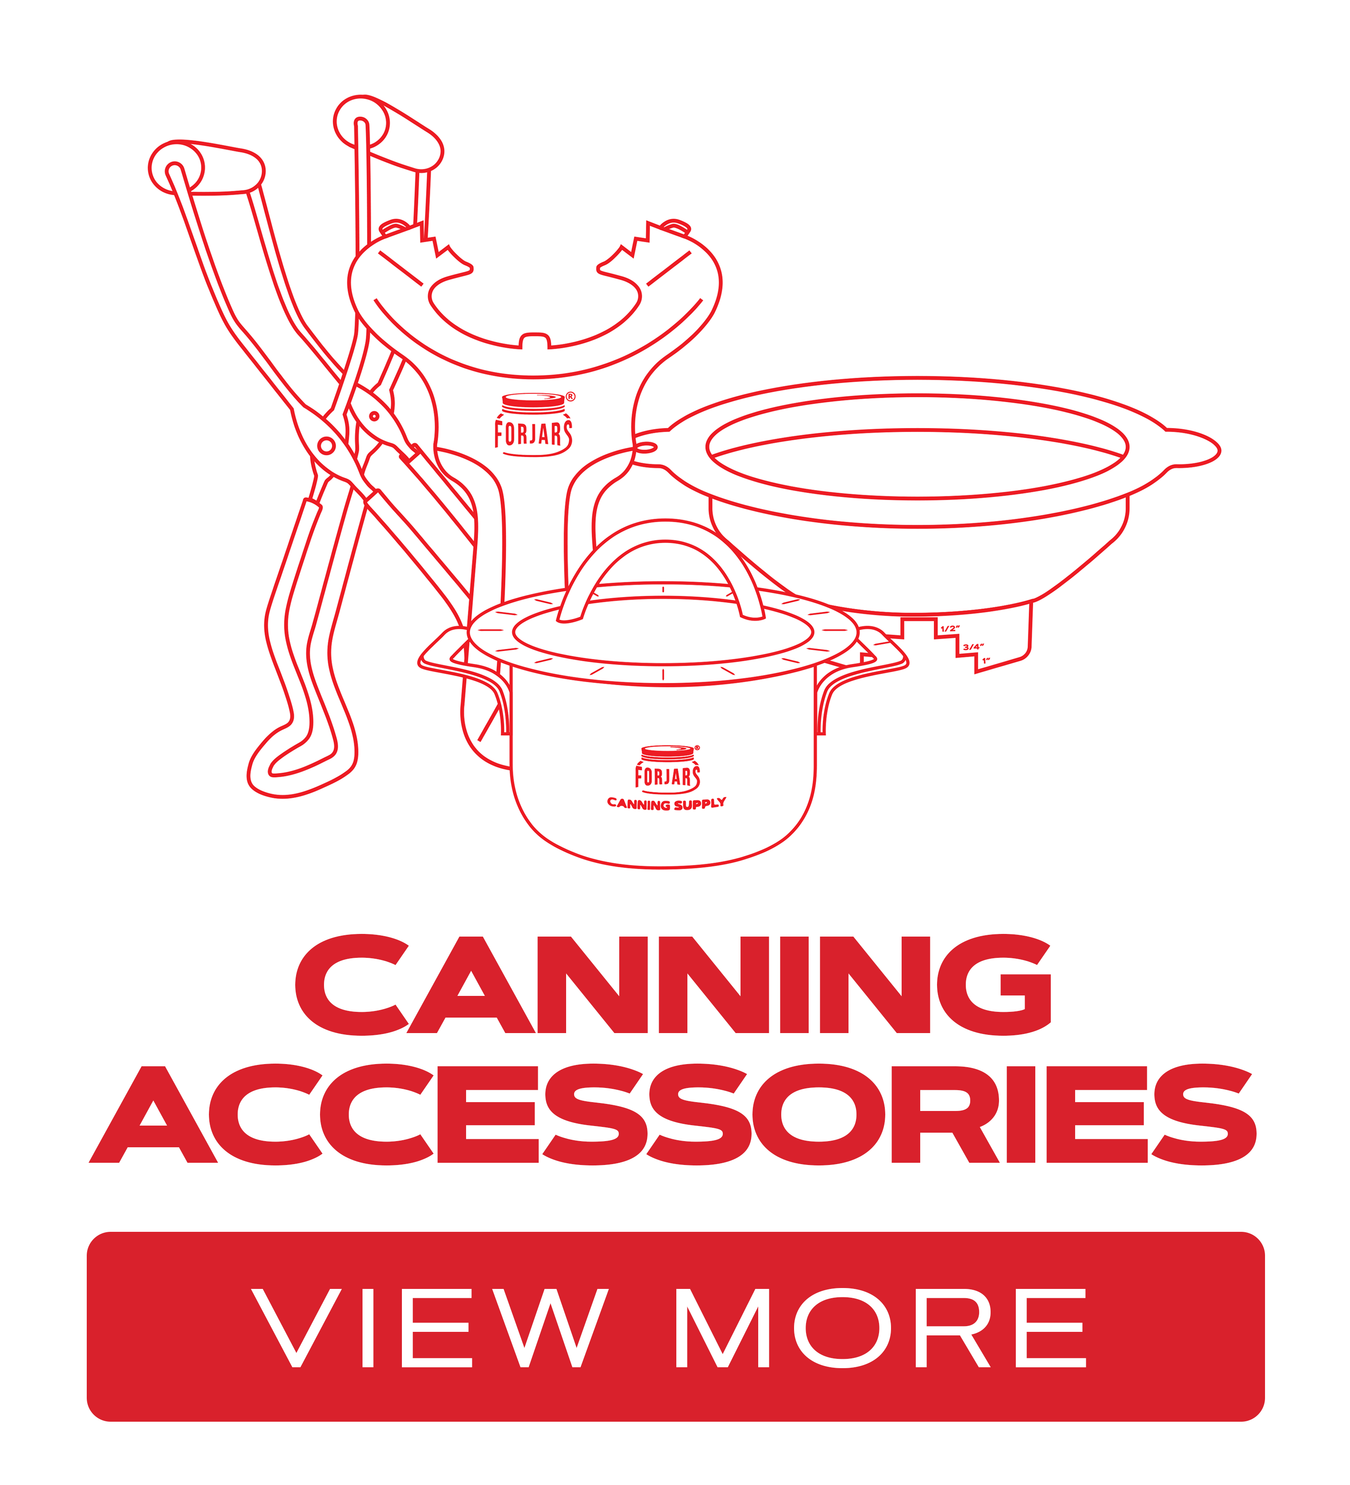 CANNING ACCESSORIES